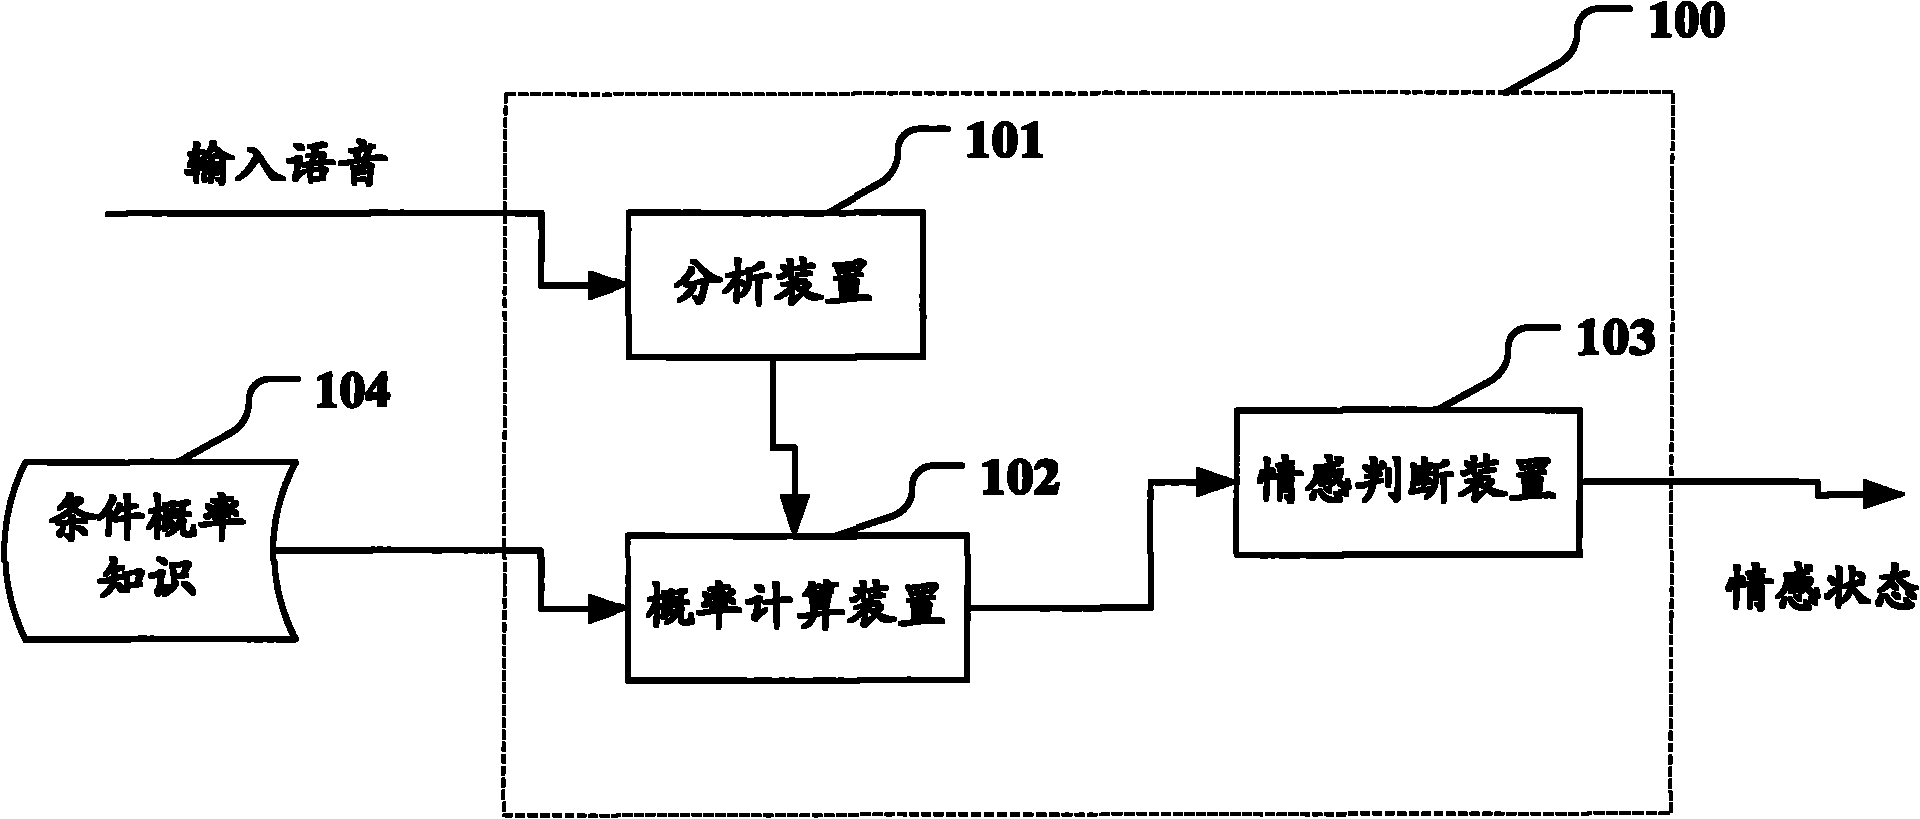 Speech emotion recognition equipment and speech emotion recognition method